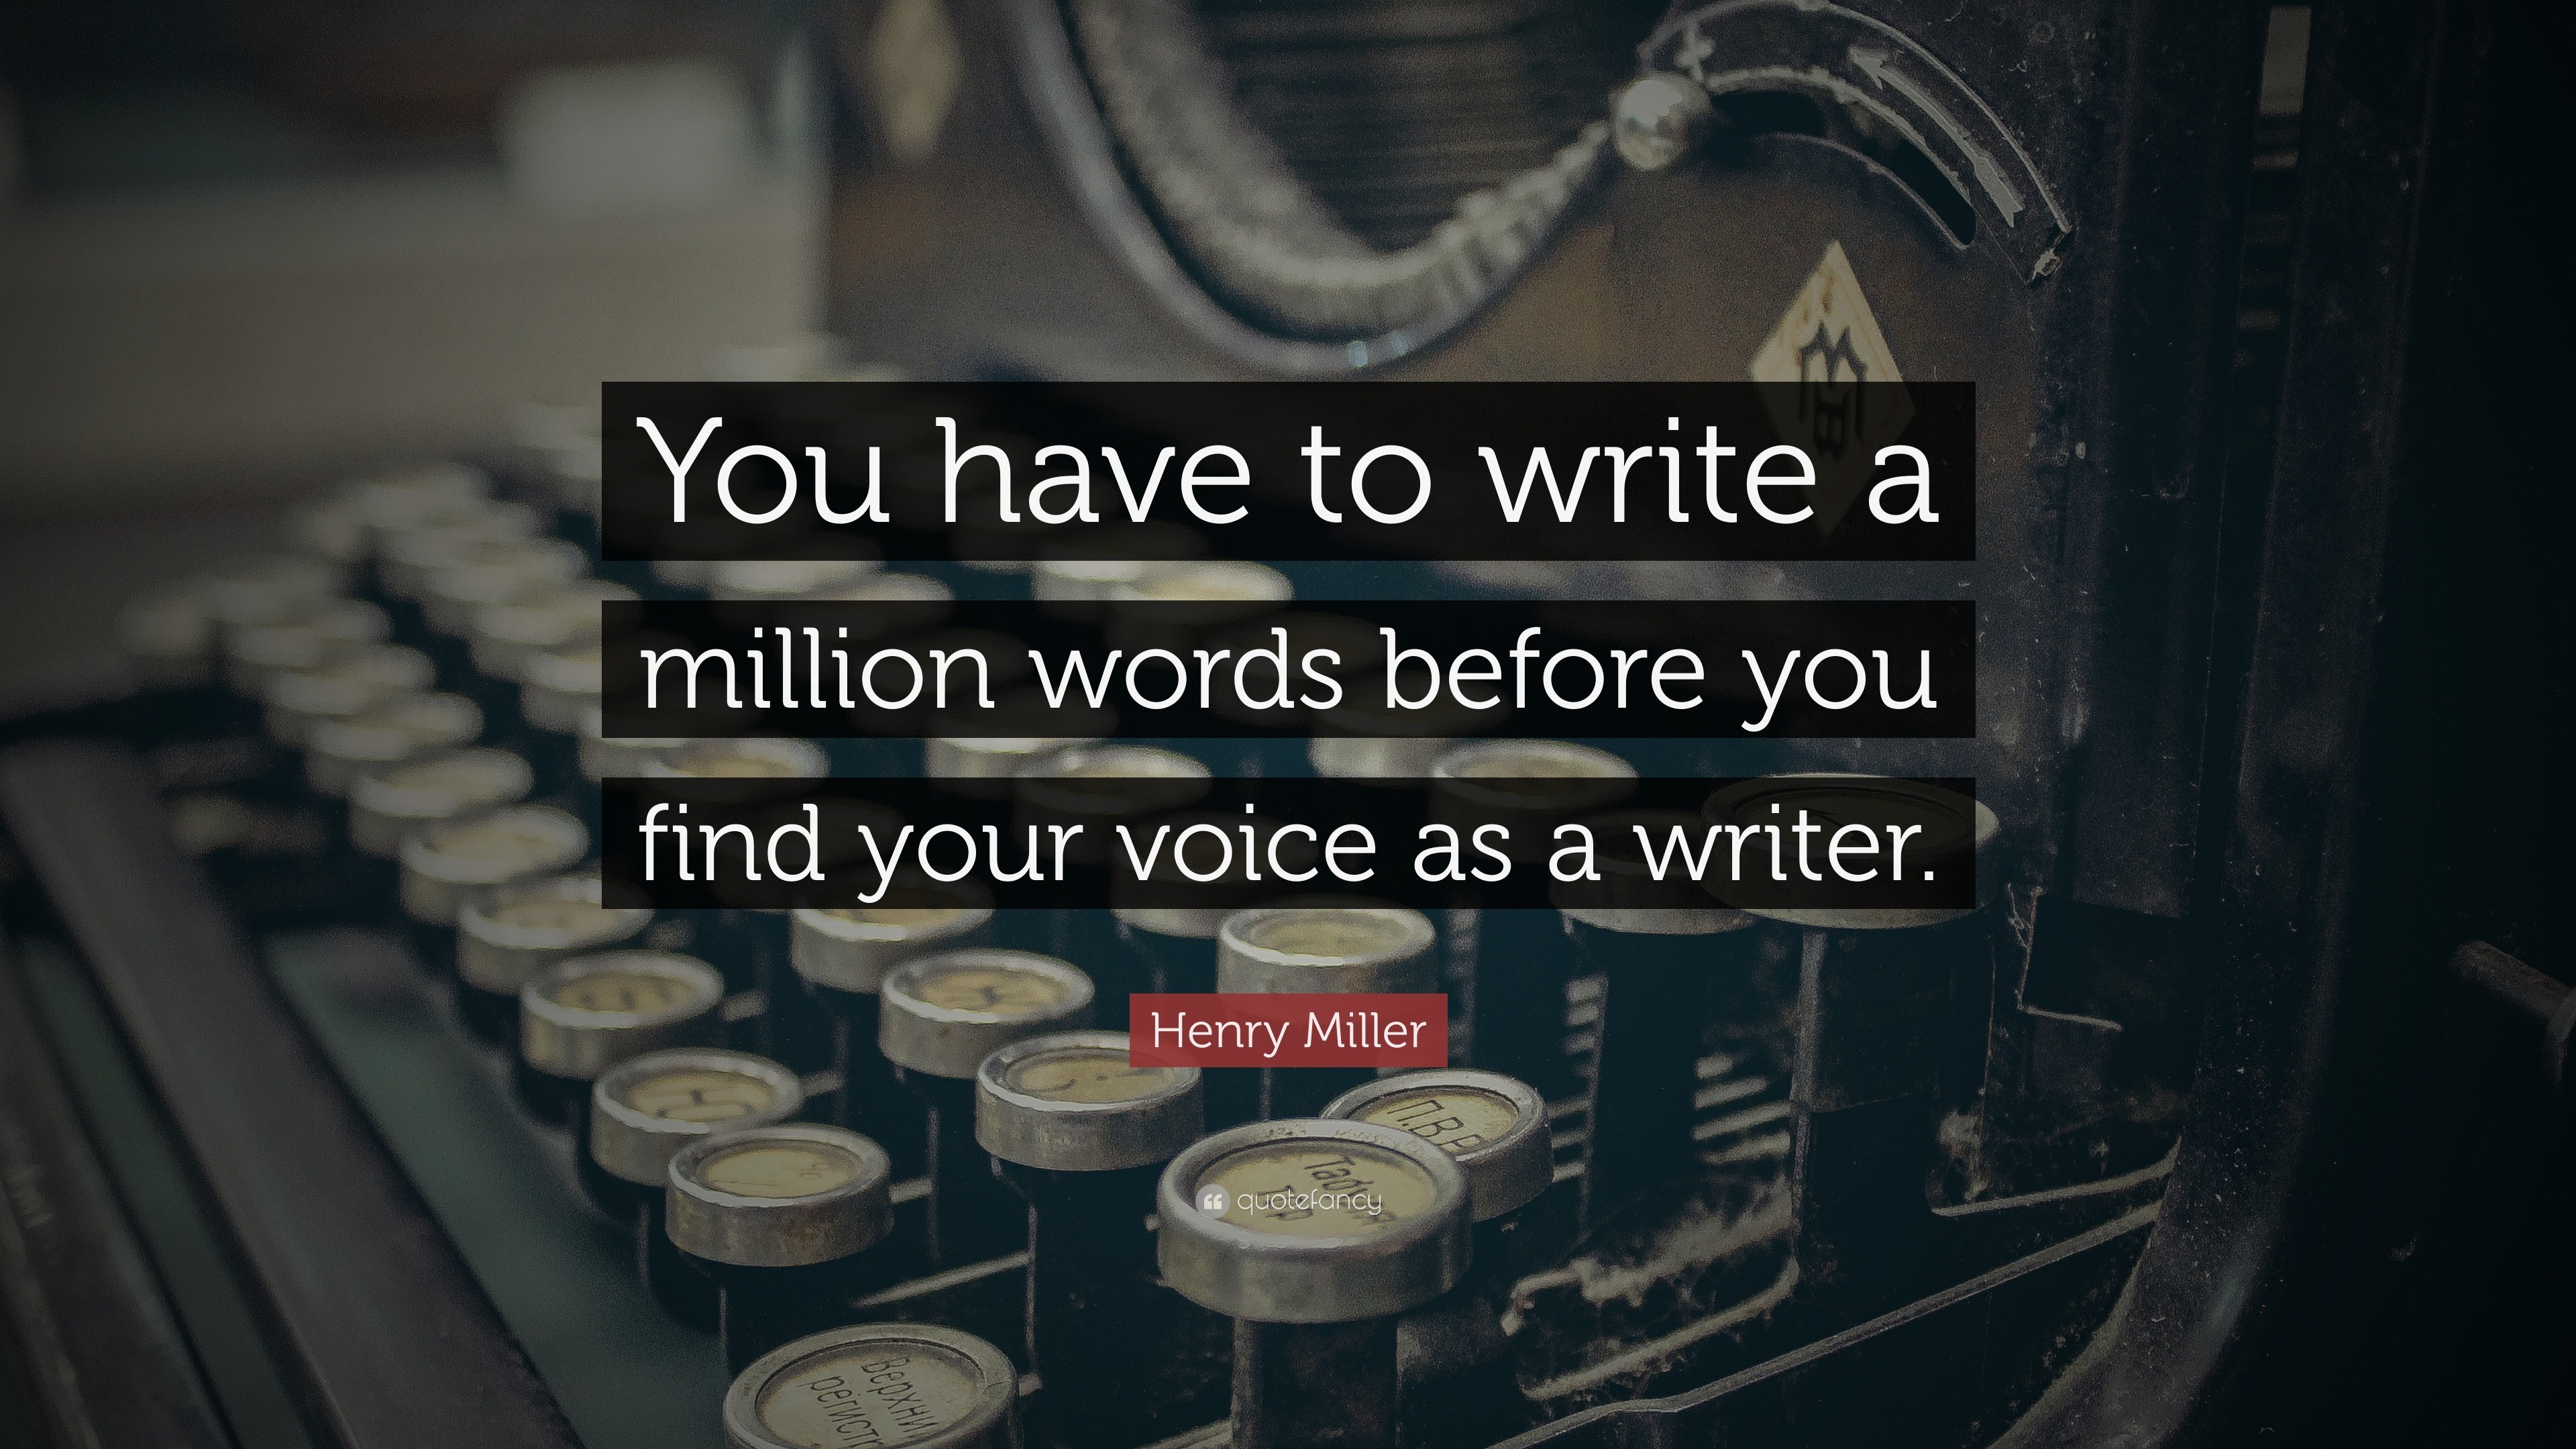 You have to write a million words